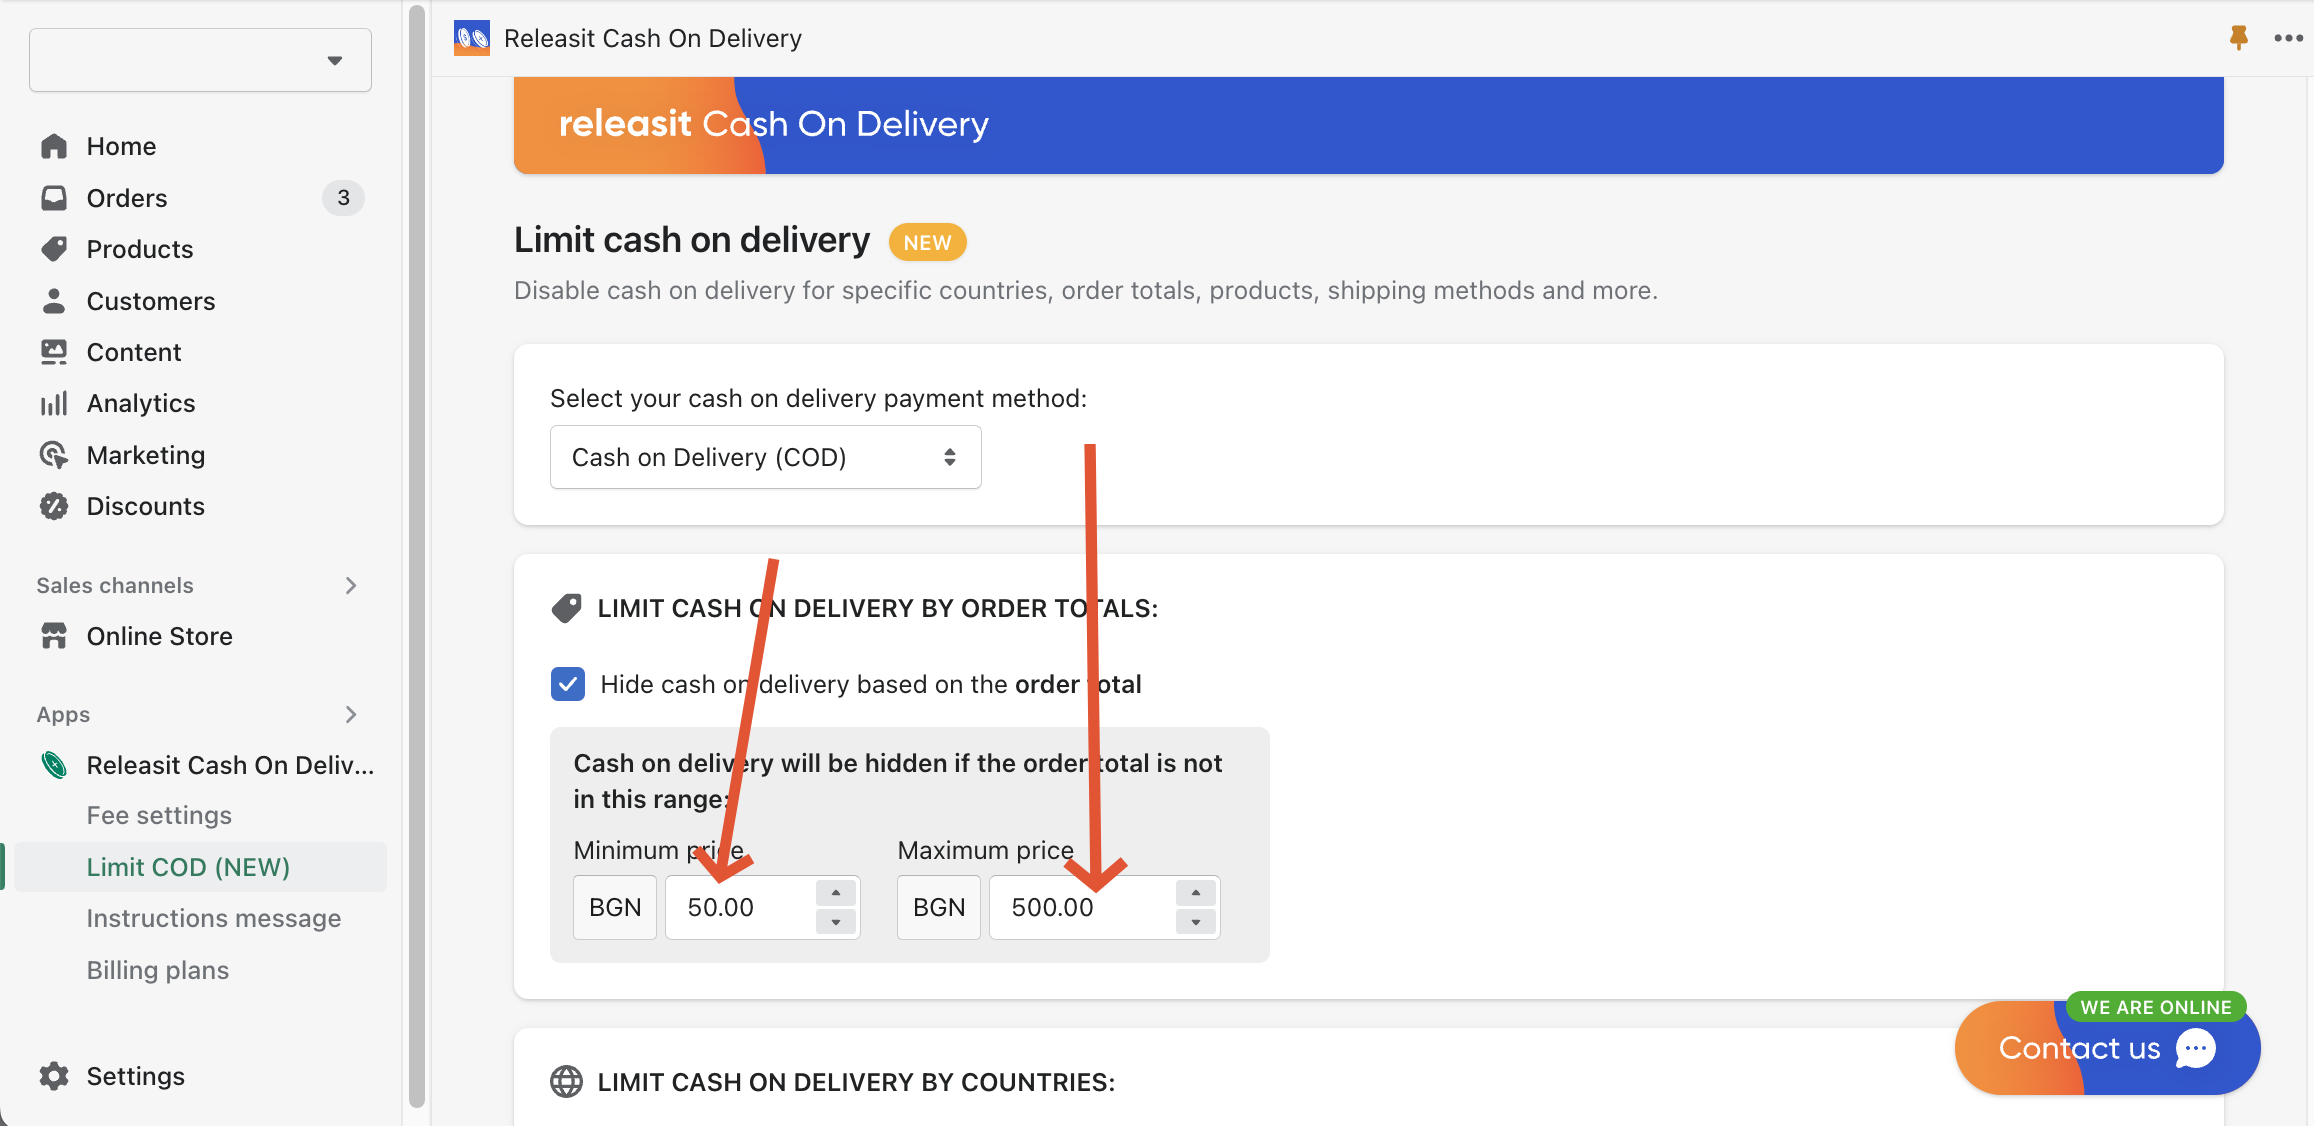 Releasit Cash On Delivery Limit COD page Min / Max setting